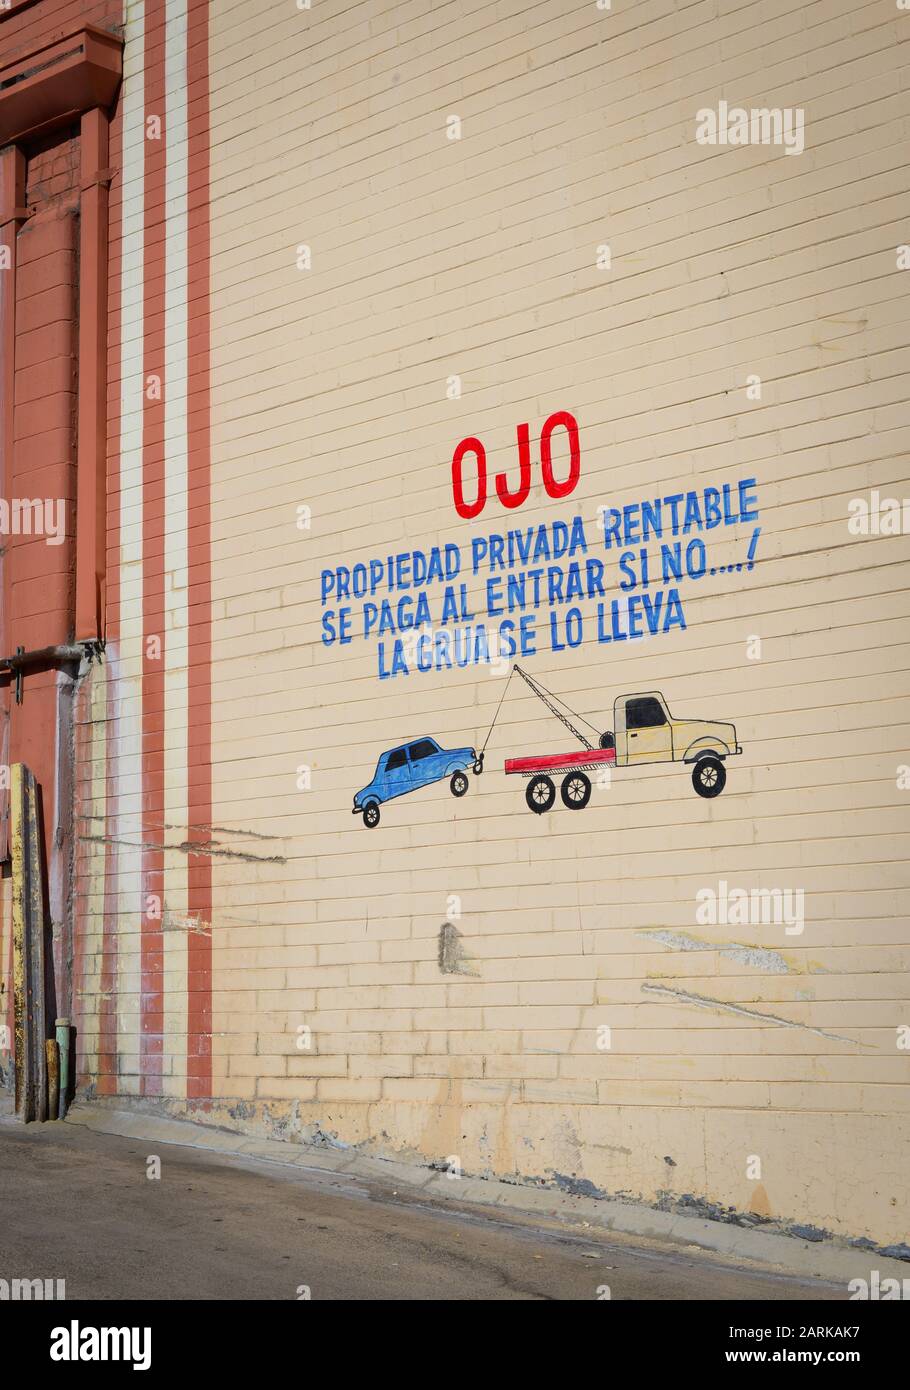 Spanish language stenciled onto old brick wall with childlike drawing and warning to pay to park on private property or car will be be towed by tow tr Stock Photo